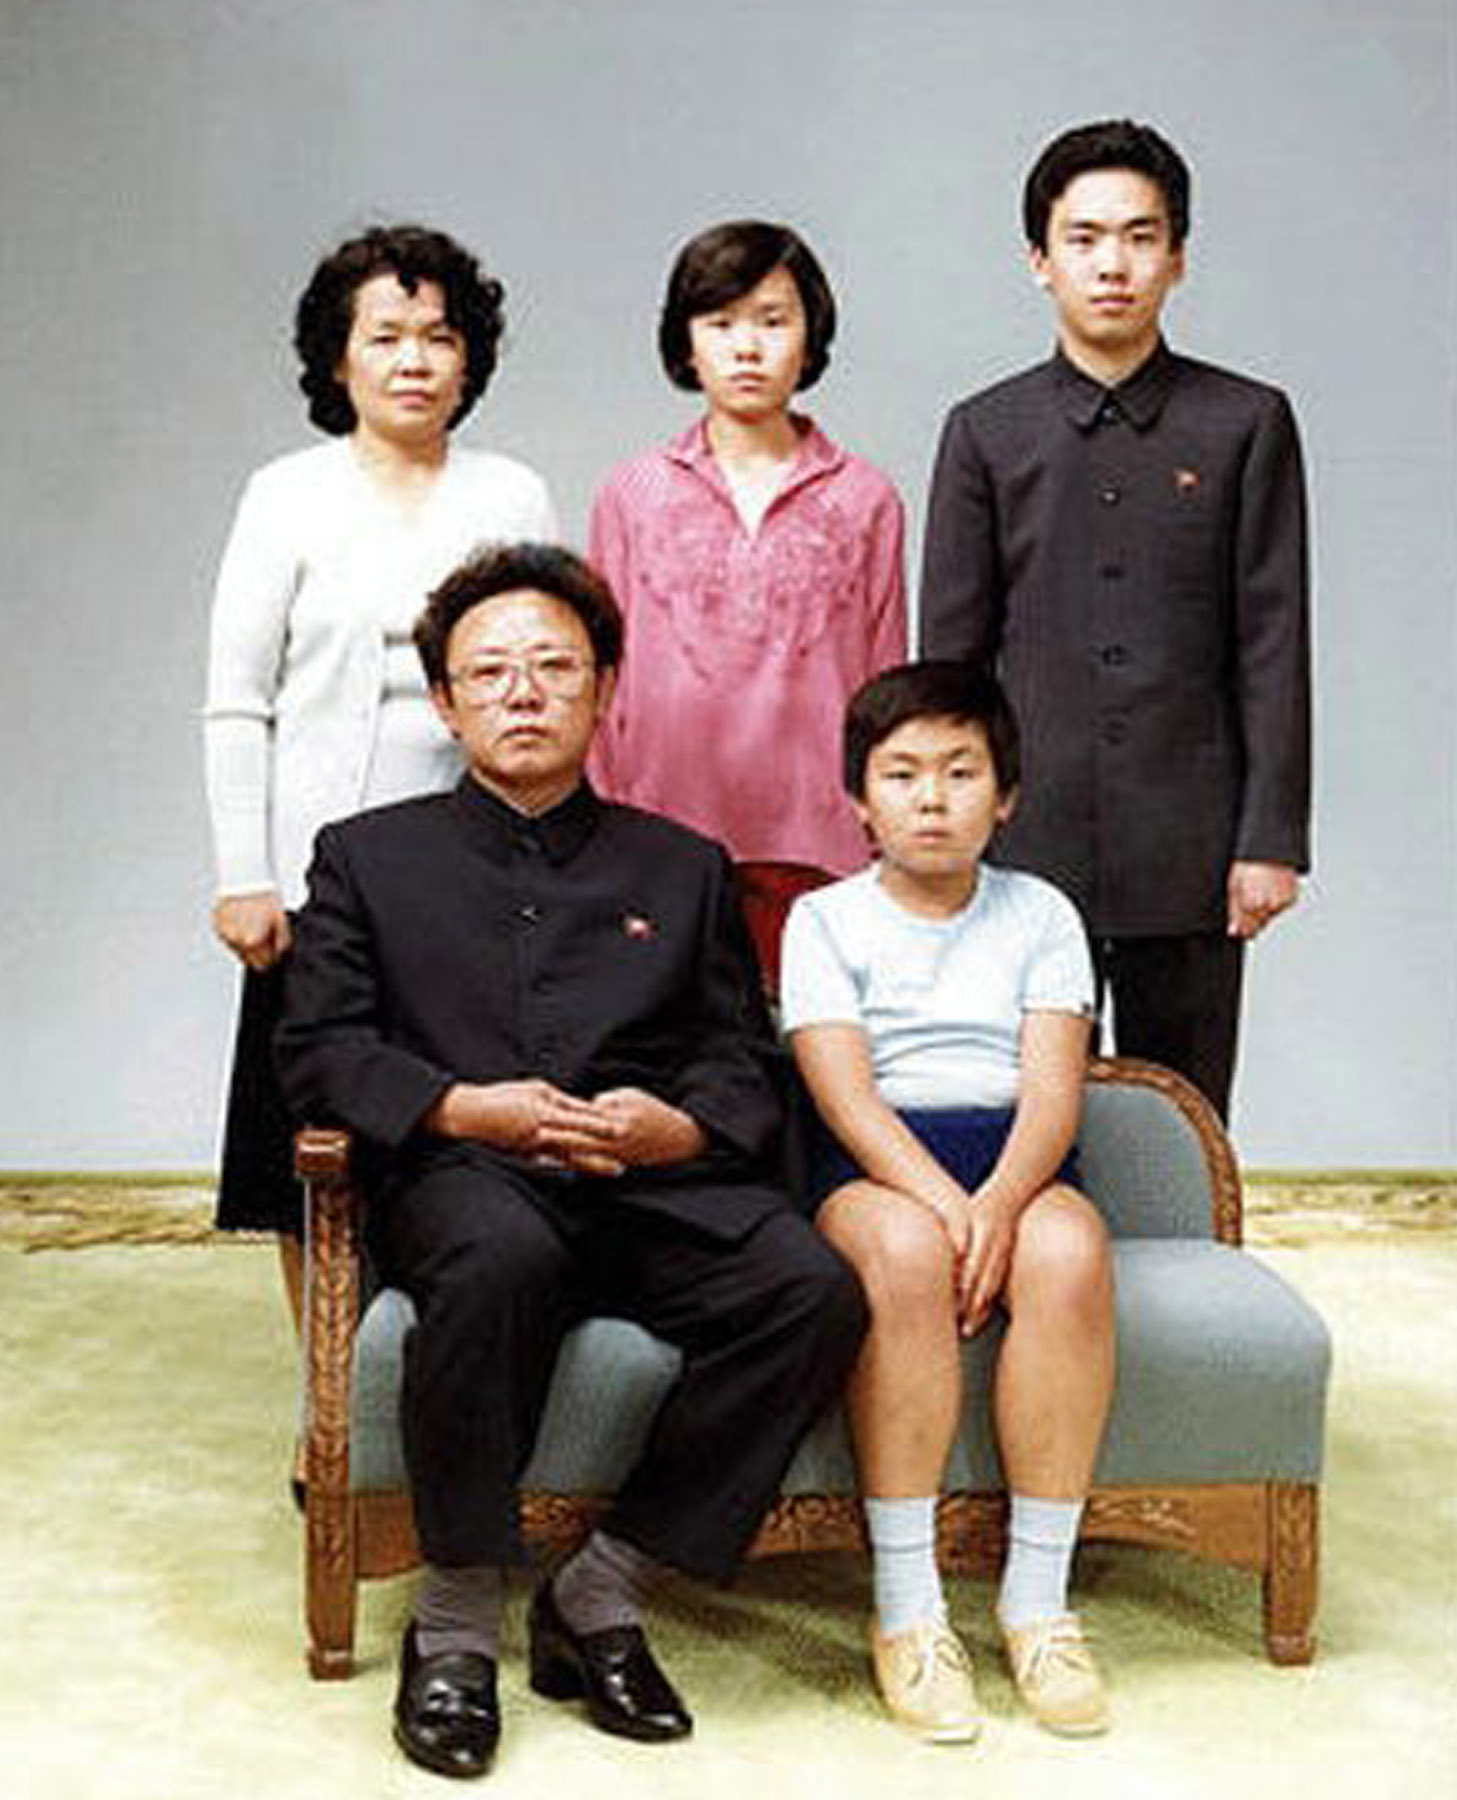 North Korean leader Kim Jong Il (first row, left) sits next to his first-born son Kim Jong Nam (1971–2017) in this 1981 family photo in Pyongyang (Choongang Monthly Magazine/Newsmakers—Getty Images)